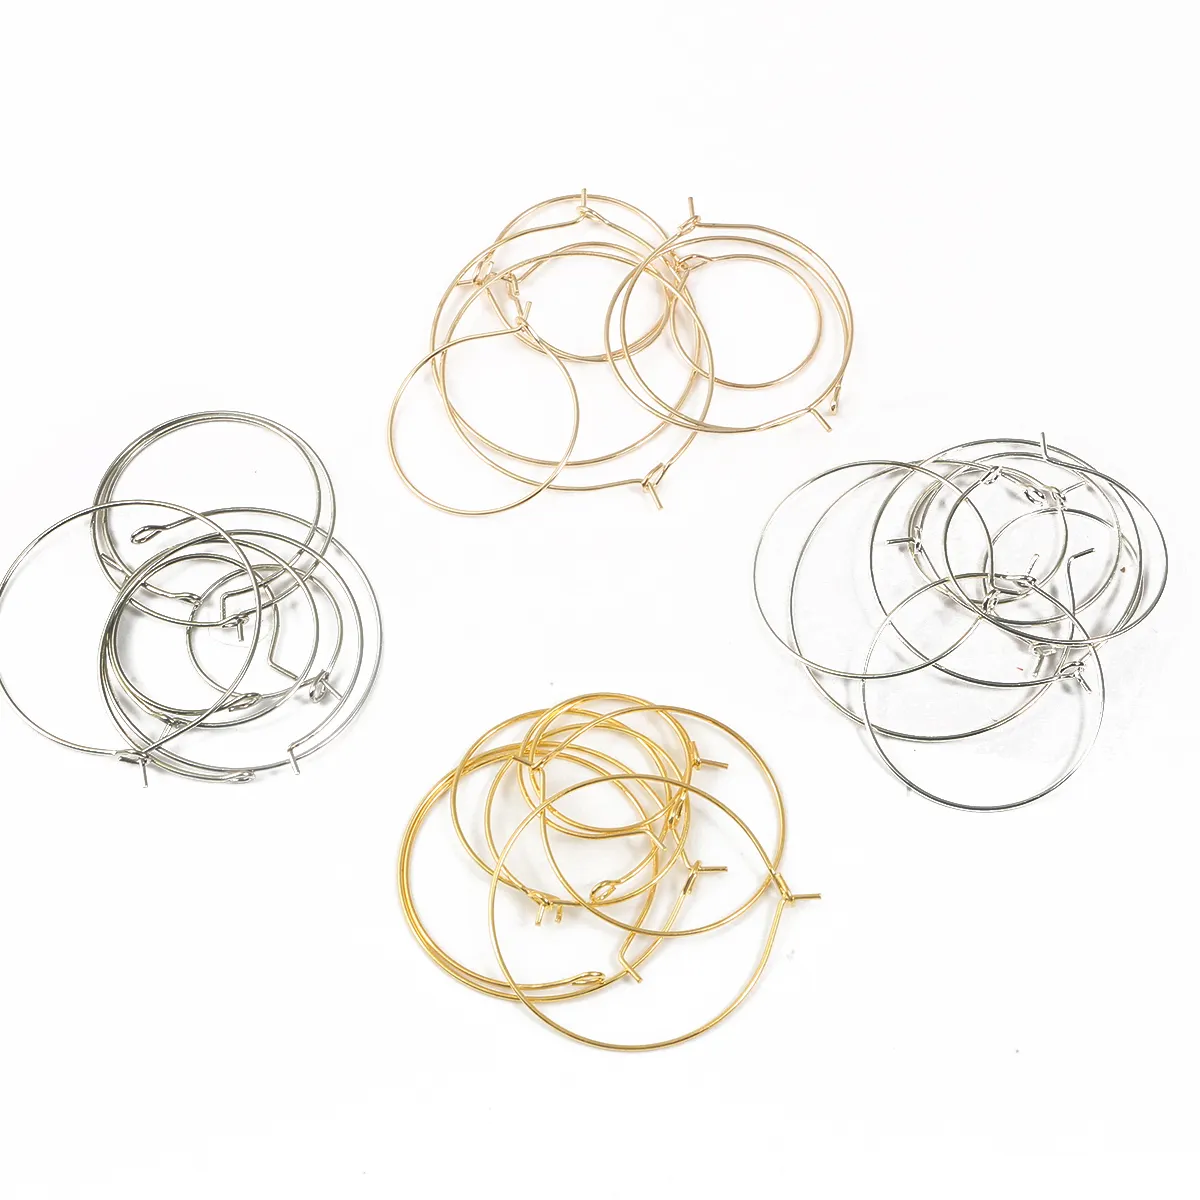 50pcs/lot 20 25 30 35 mm Silver KC Gold Hoops Earrings Big Circle Ear Wire Hoops Earrings Wires For DIY Jewelry Making Supplies